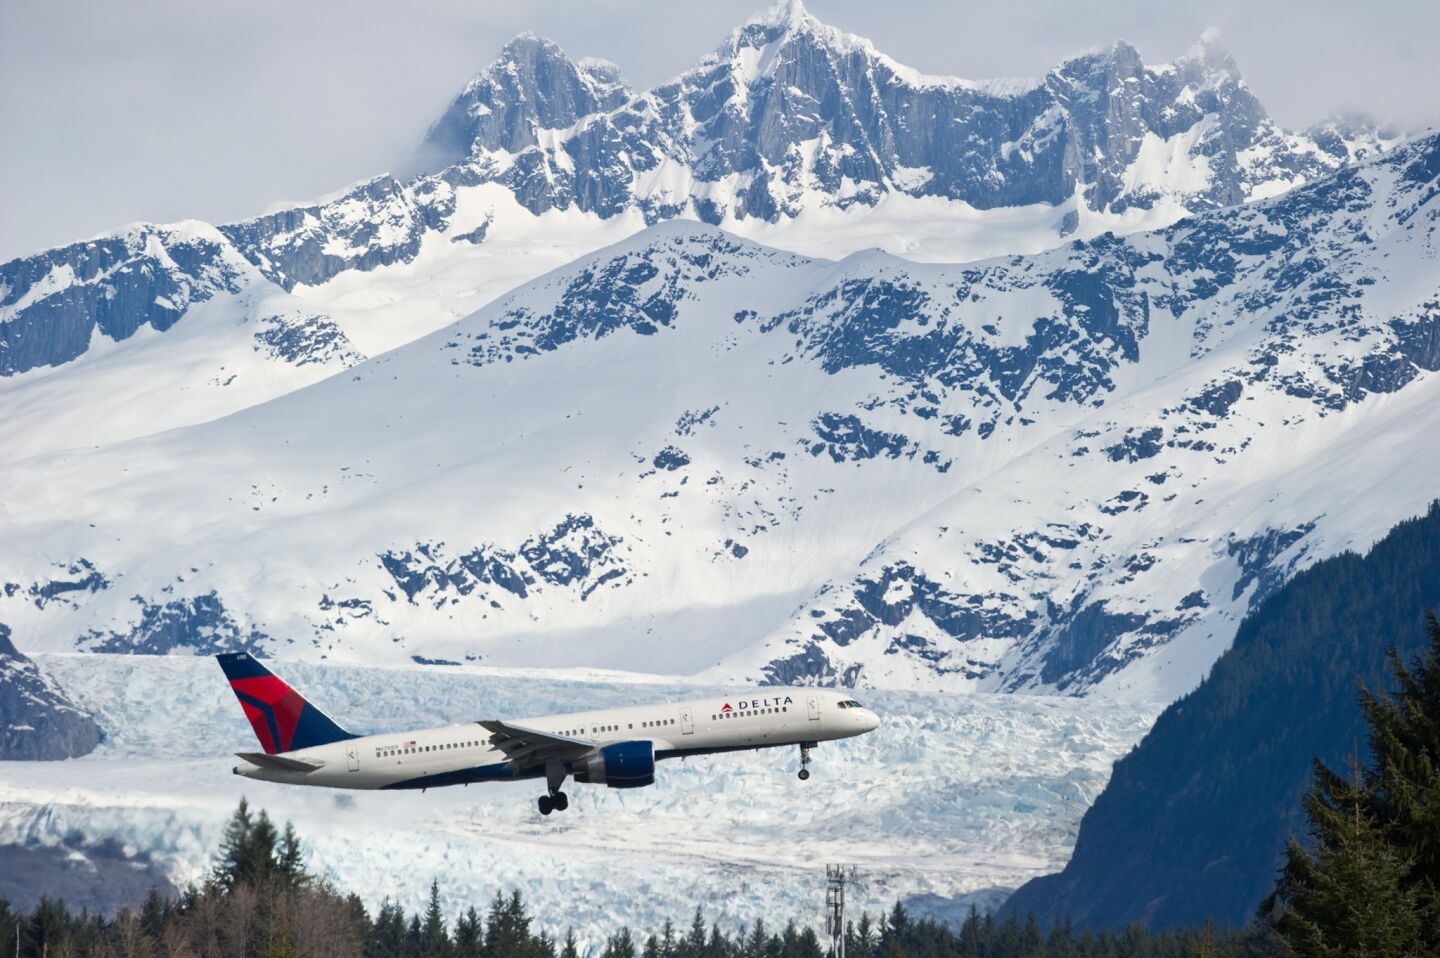 Rating: 71 out of 100.Delta Air Lines came in third and was up from 2013, when it scored 68.